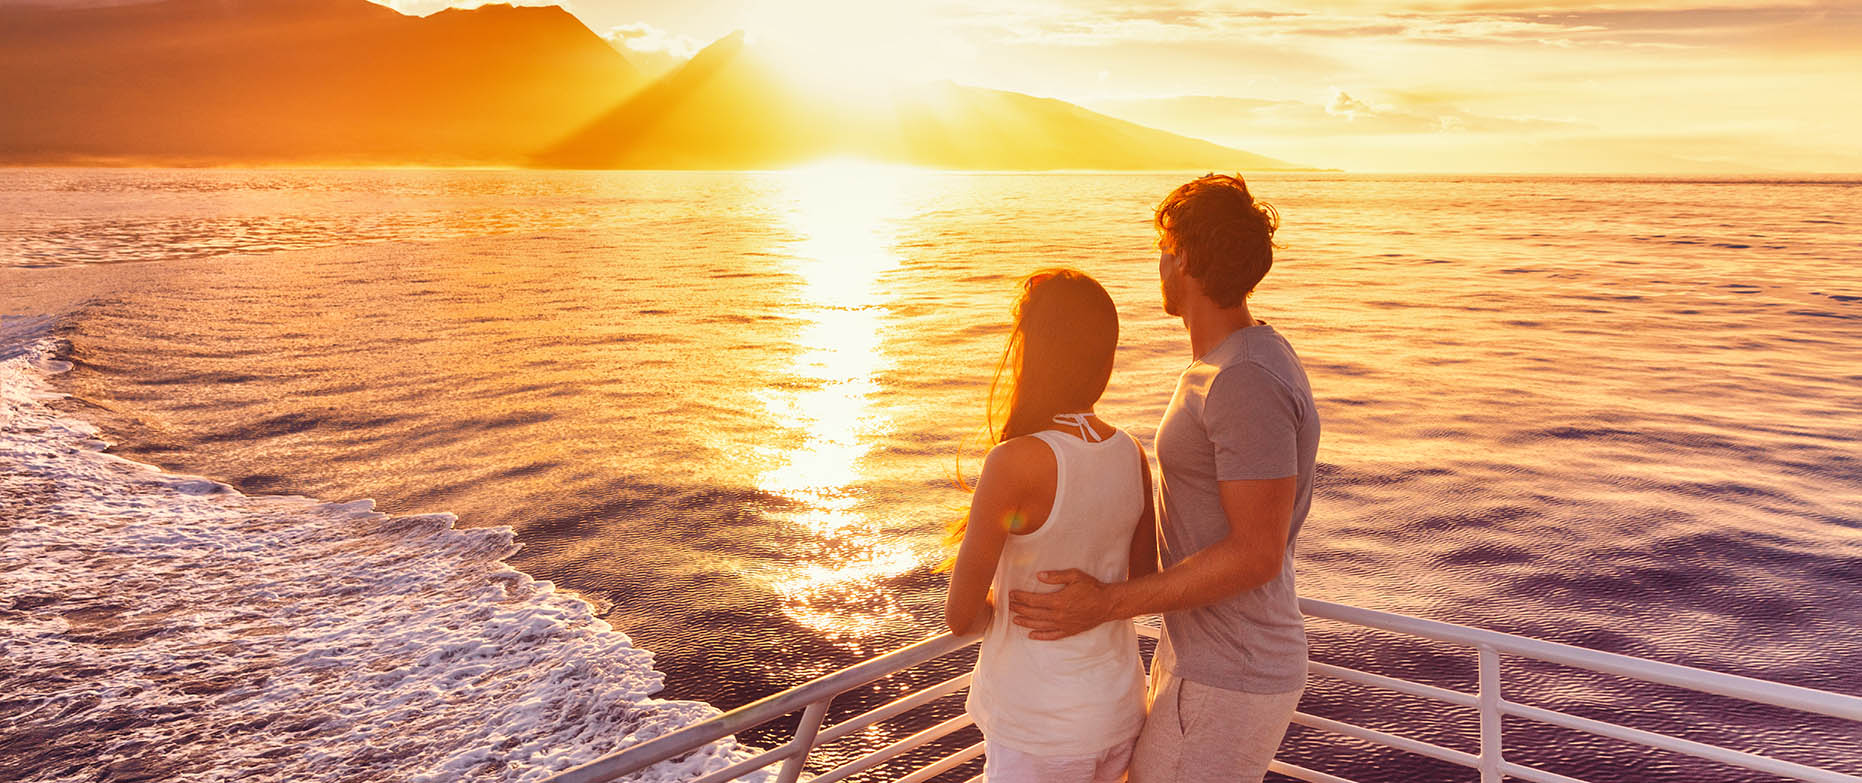 The Best Cruises For Couples The Cruise Line Blog